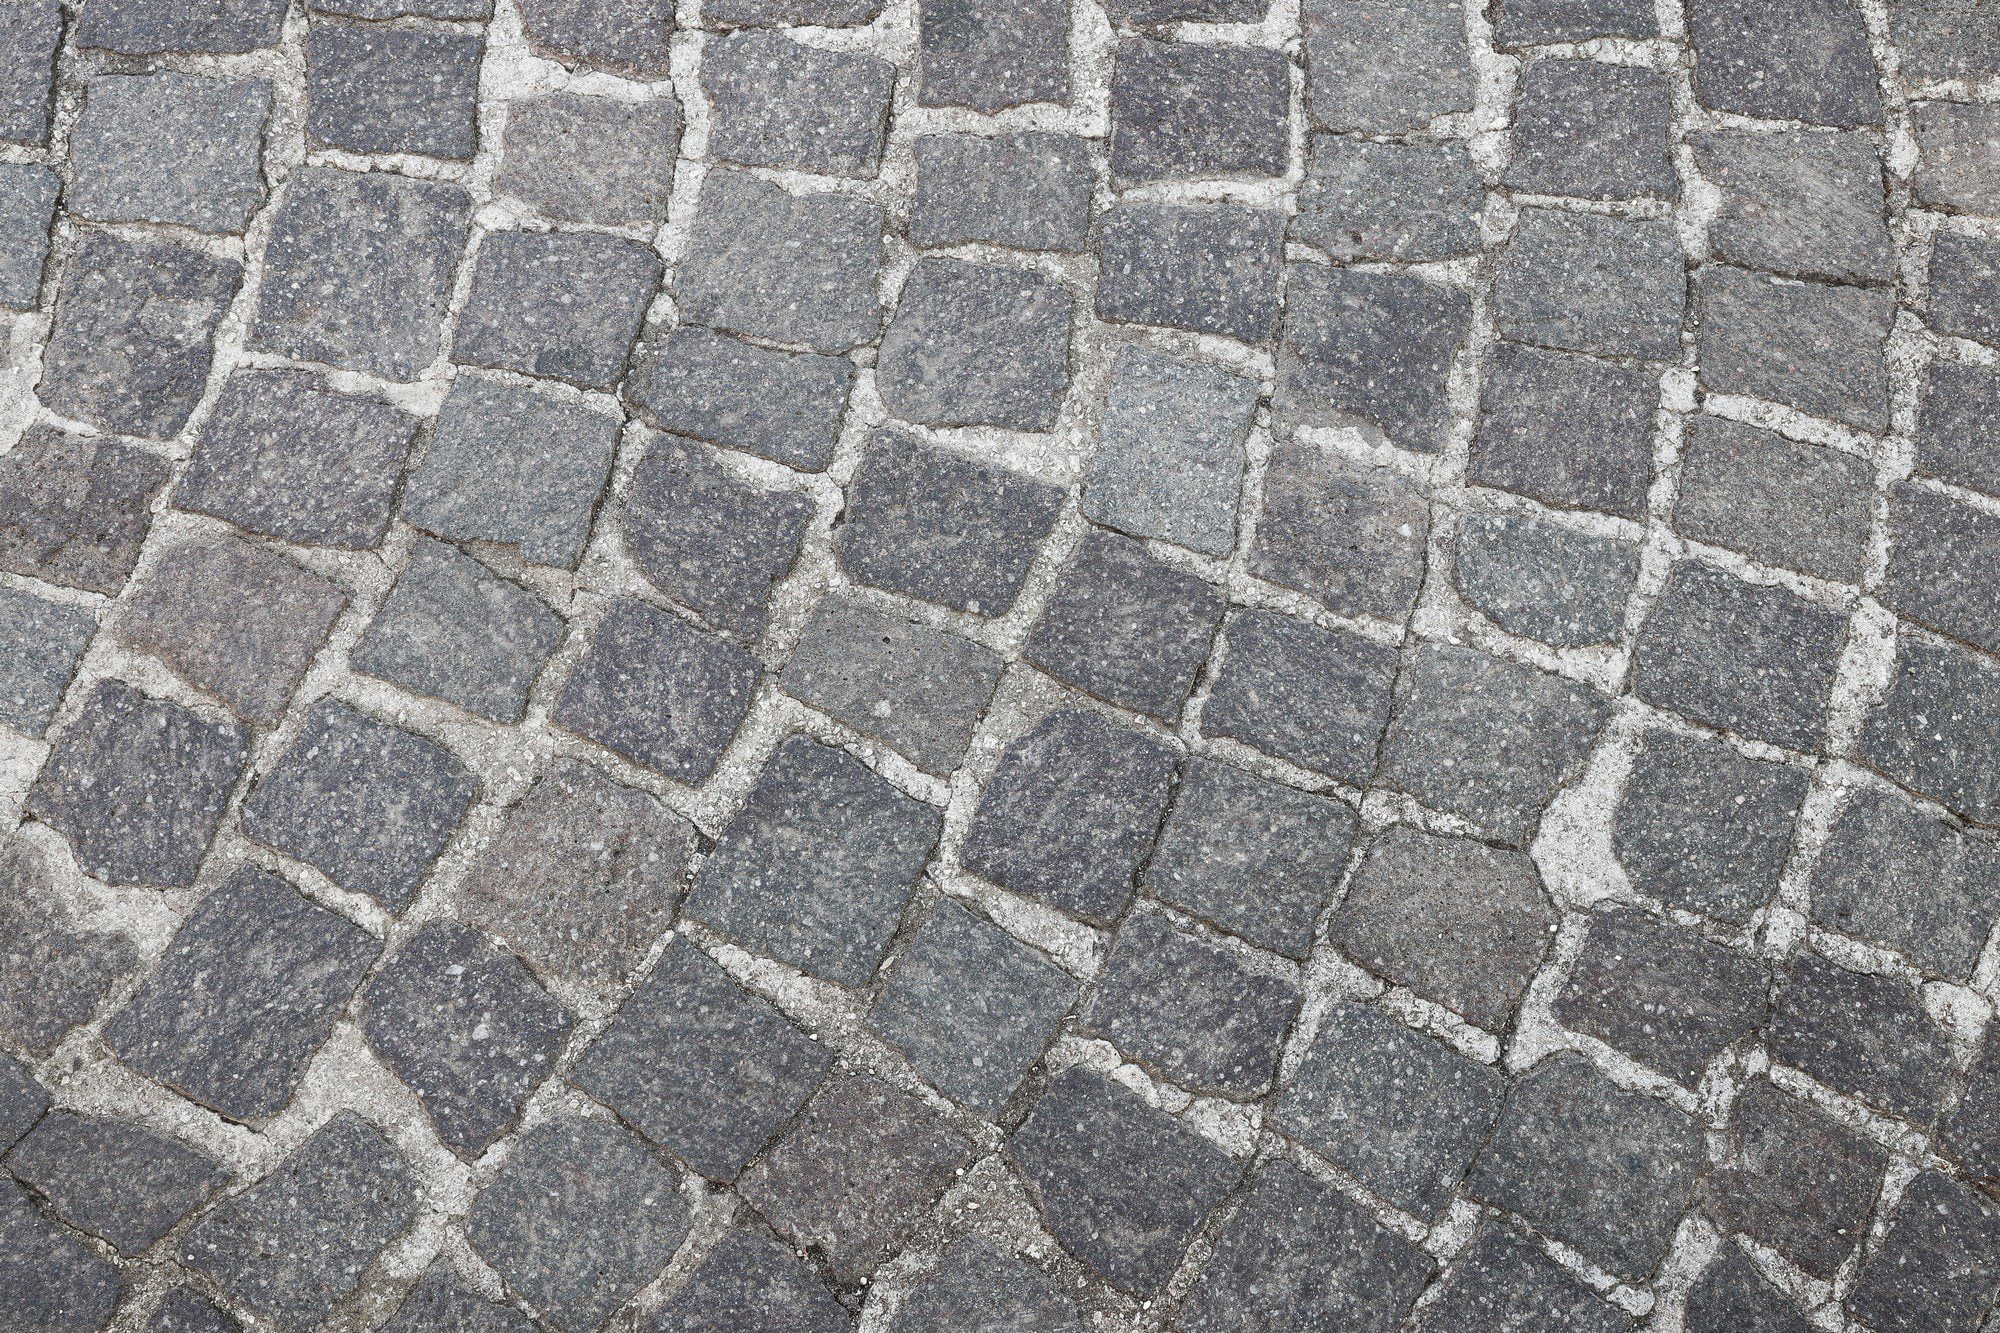 This image shows a surface covered with cobblestones, arranged in a pattern. The cobblestones appear to be of varying shades of grey and are separated by what looks like white or lighter-coloured grout or filler material. The arrangement is neat and has a classic look that is often found in pedestrian areas, historic districts, or as decorative paving.